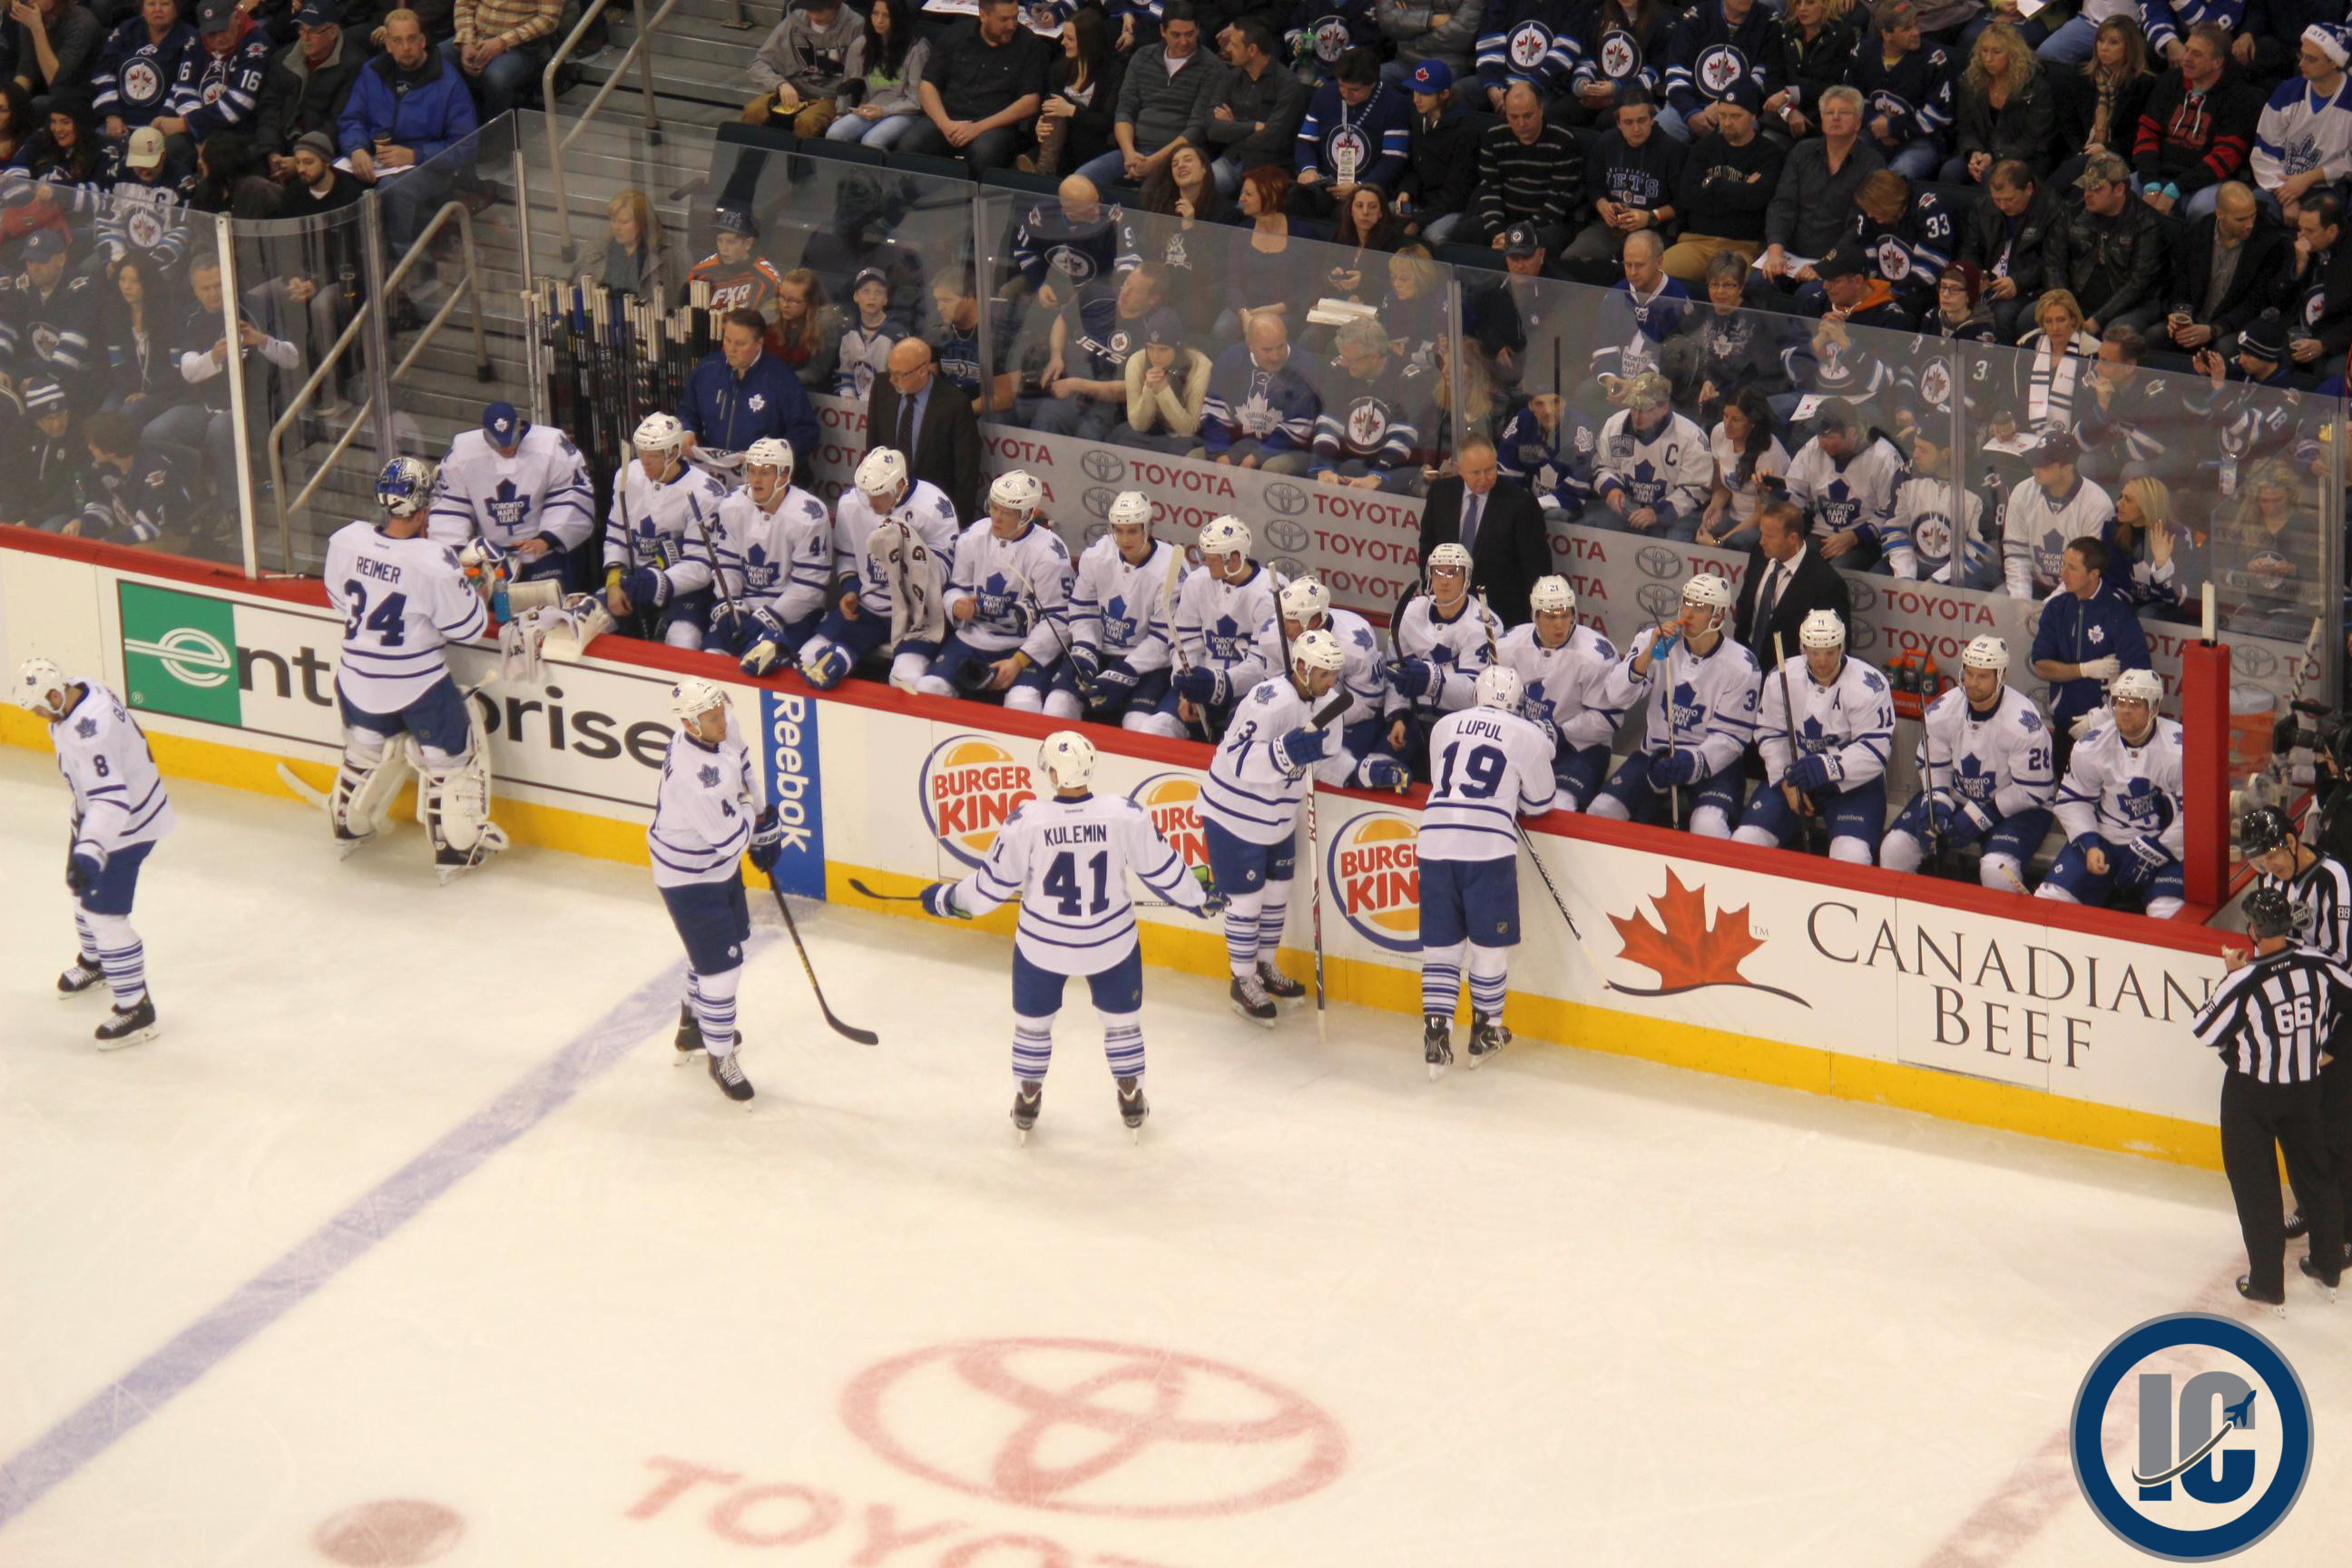 Leafs bench January 25 2014